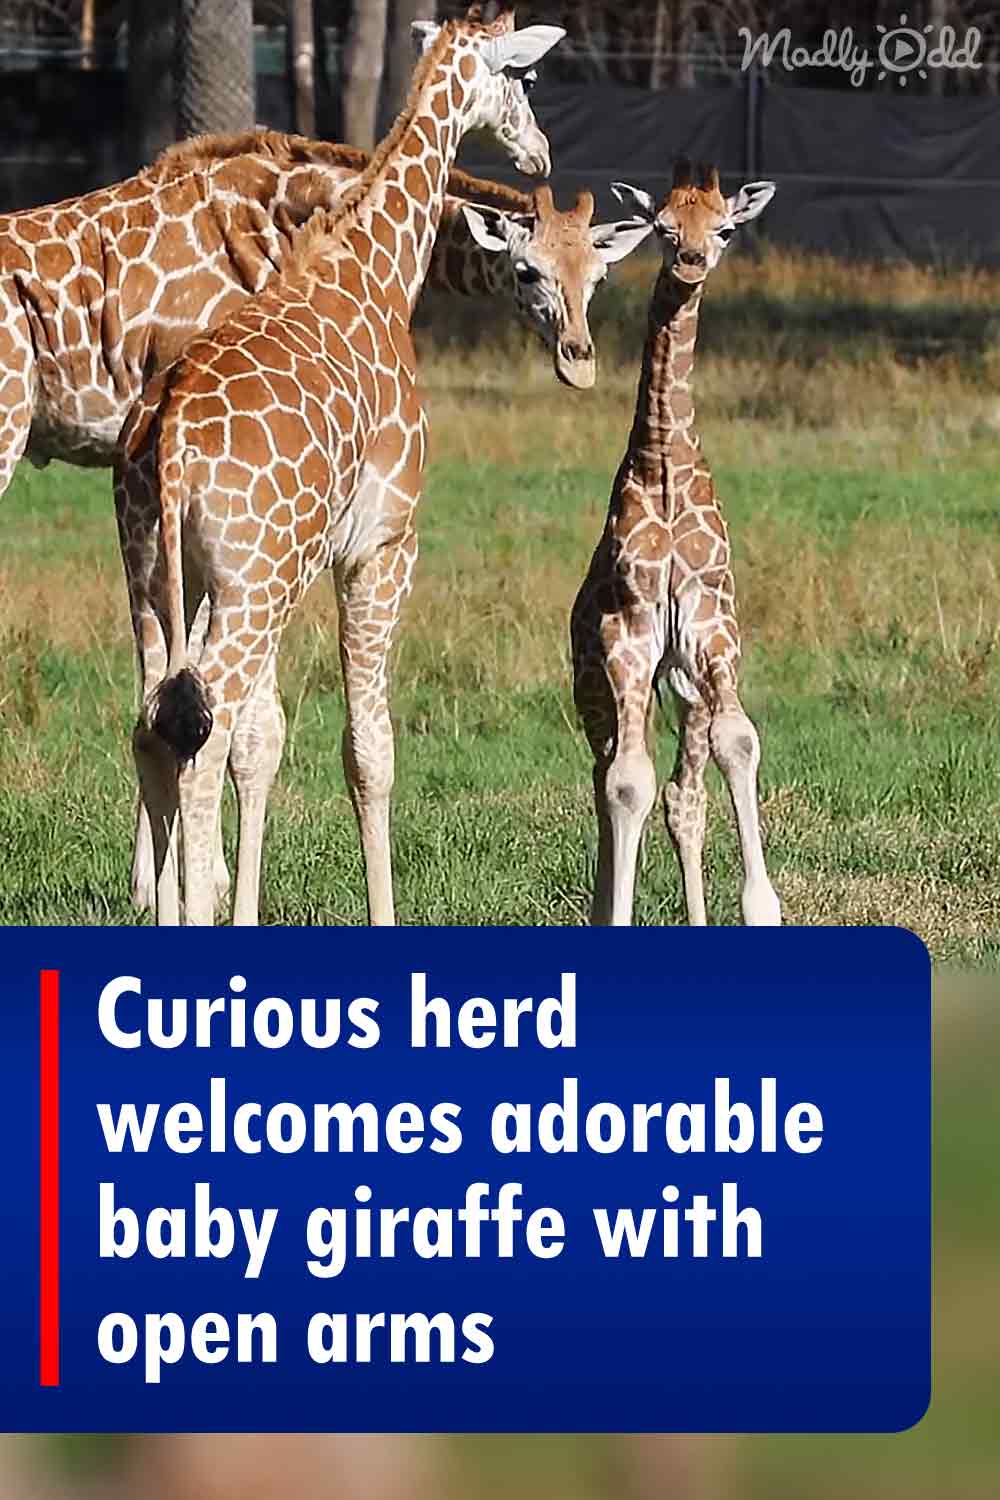 Curious herd welcomes adorable baby giraffe with open arms